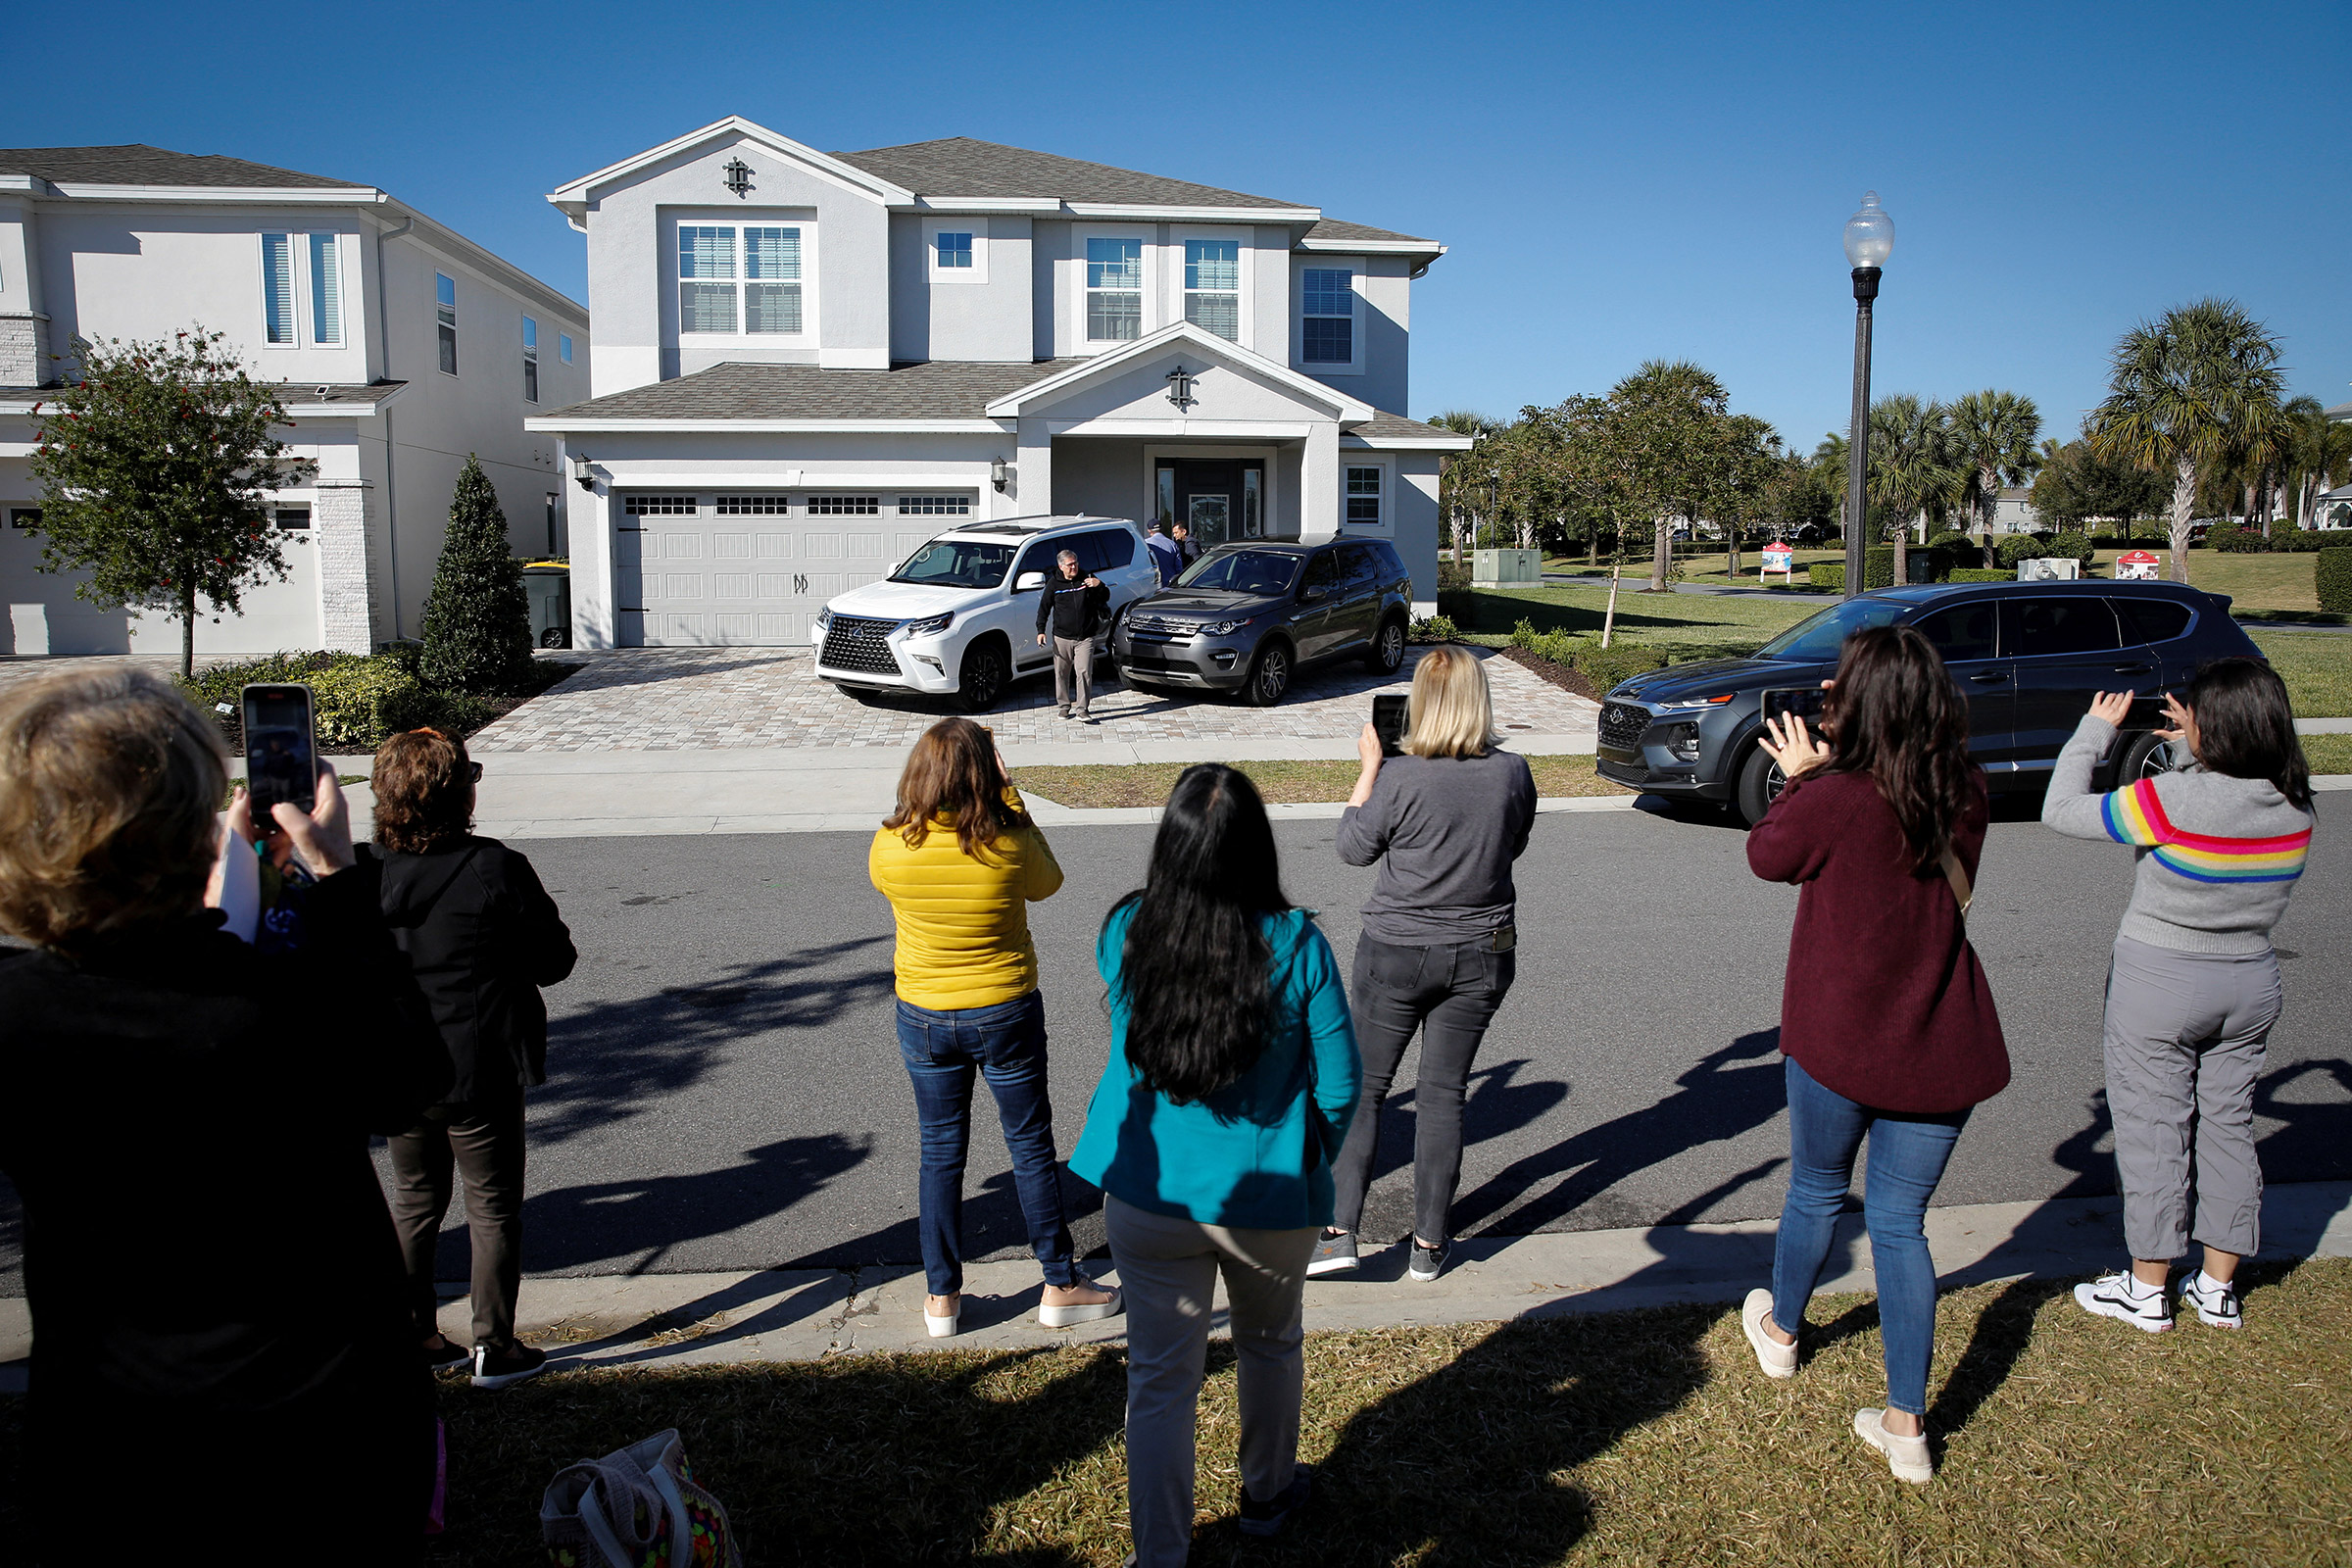 Supporters of former Brazilian President Jair Bolsonaro stand in front of the house he is staying as cardiologist Ricardo Pexoito Camarinha leaves, in Kissimmee, Fla., on Jan. 11, 2023.